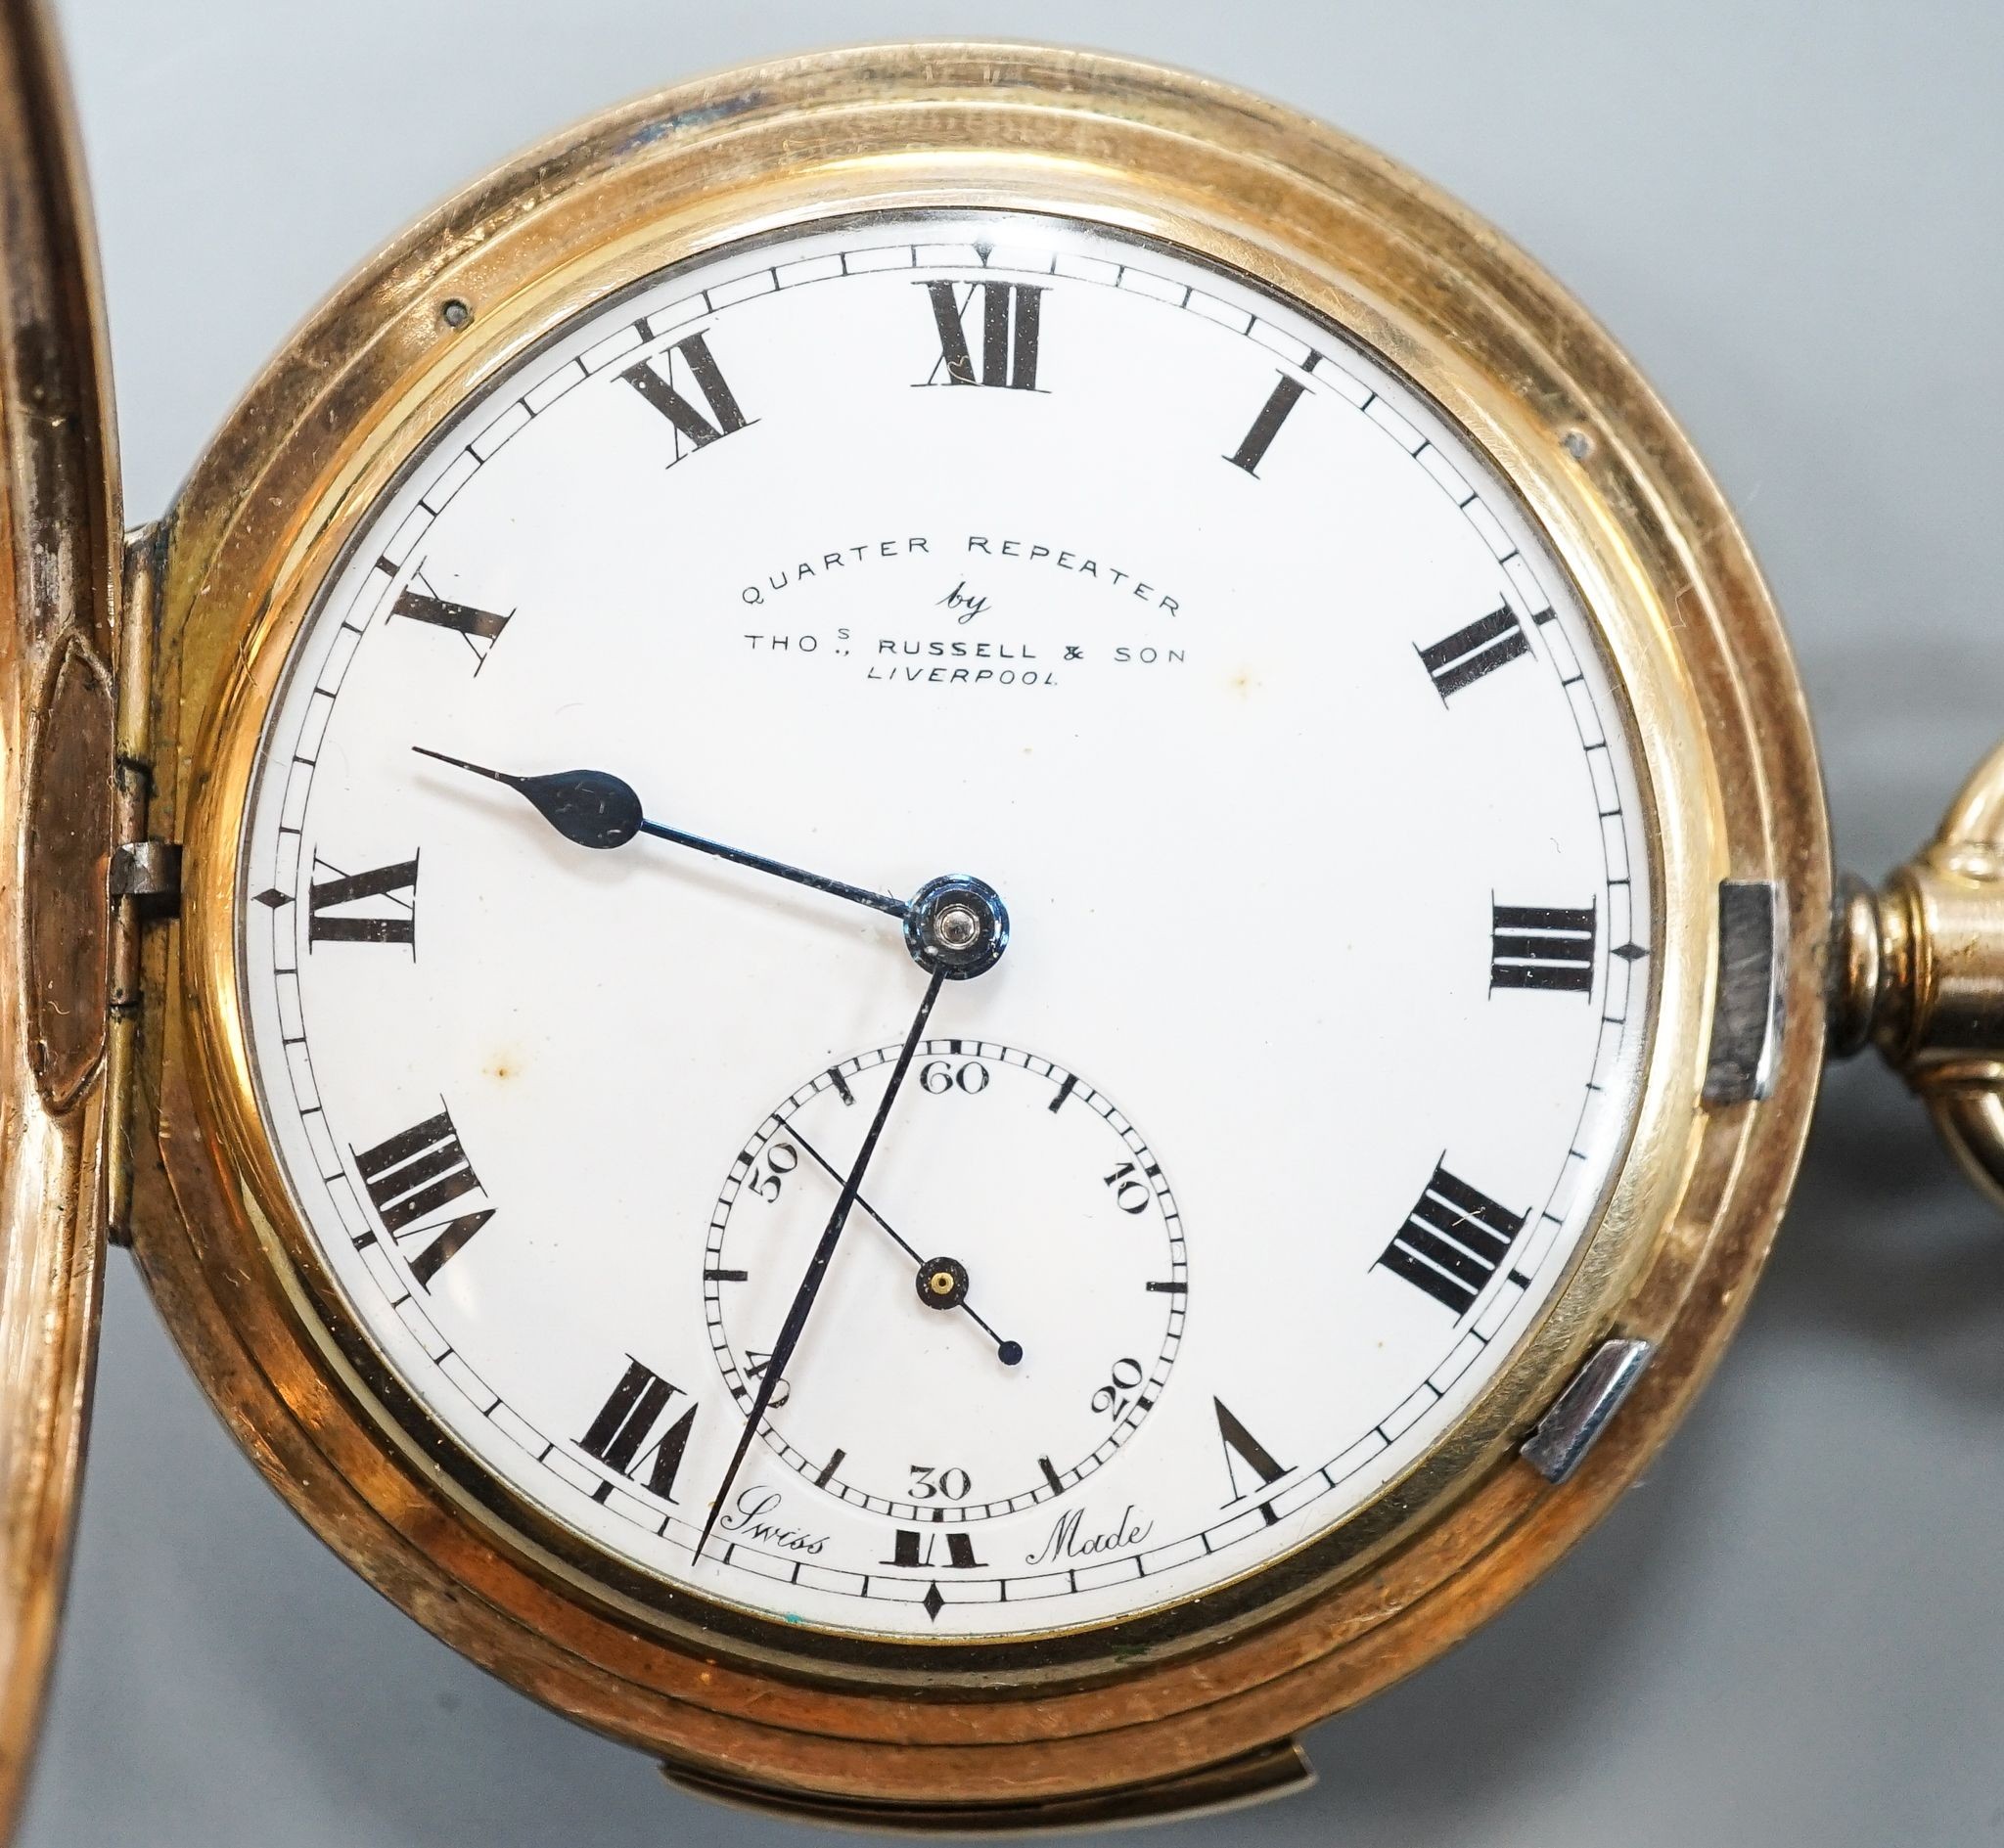 An early 20th century gold plated quarter repeating hunter keyless pocket watch by Thomas Russell & Son, Liverpool, with Roman dial and subsidiary seconds, case diameter 57mm.